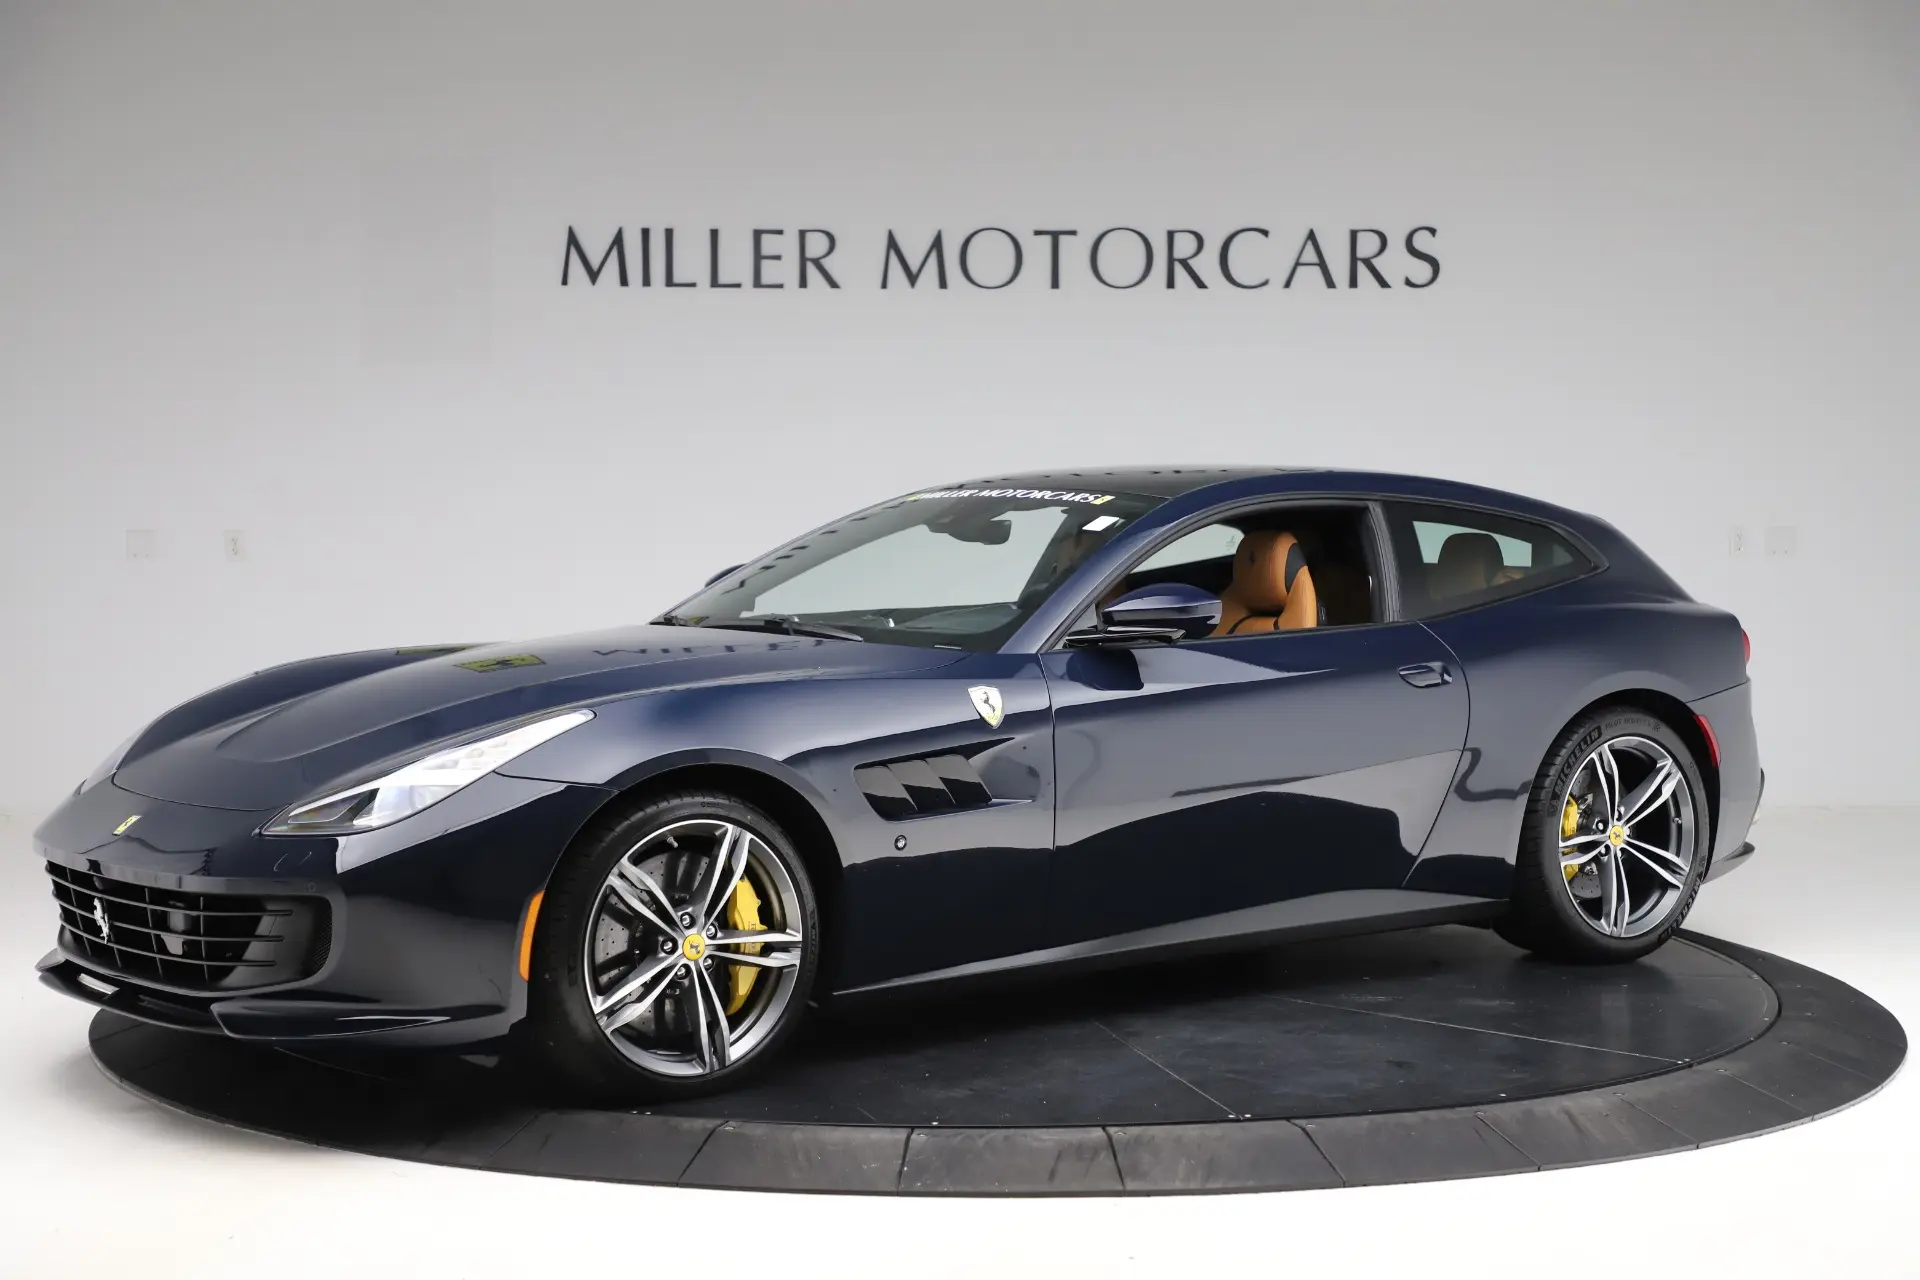 ferrari gtc4lusso price in usa - What is the MSRP for a 2018 Ferrari GTC4Lusso